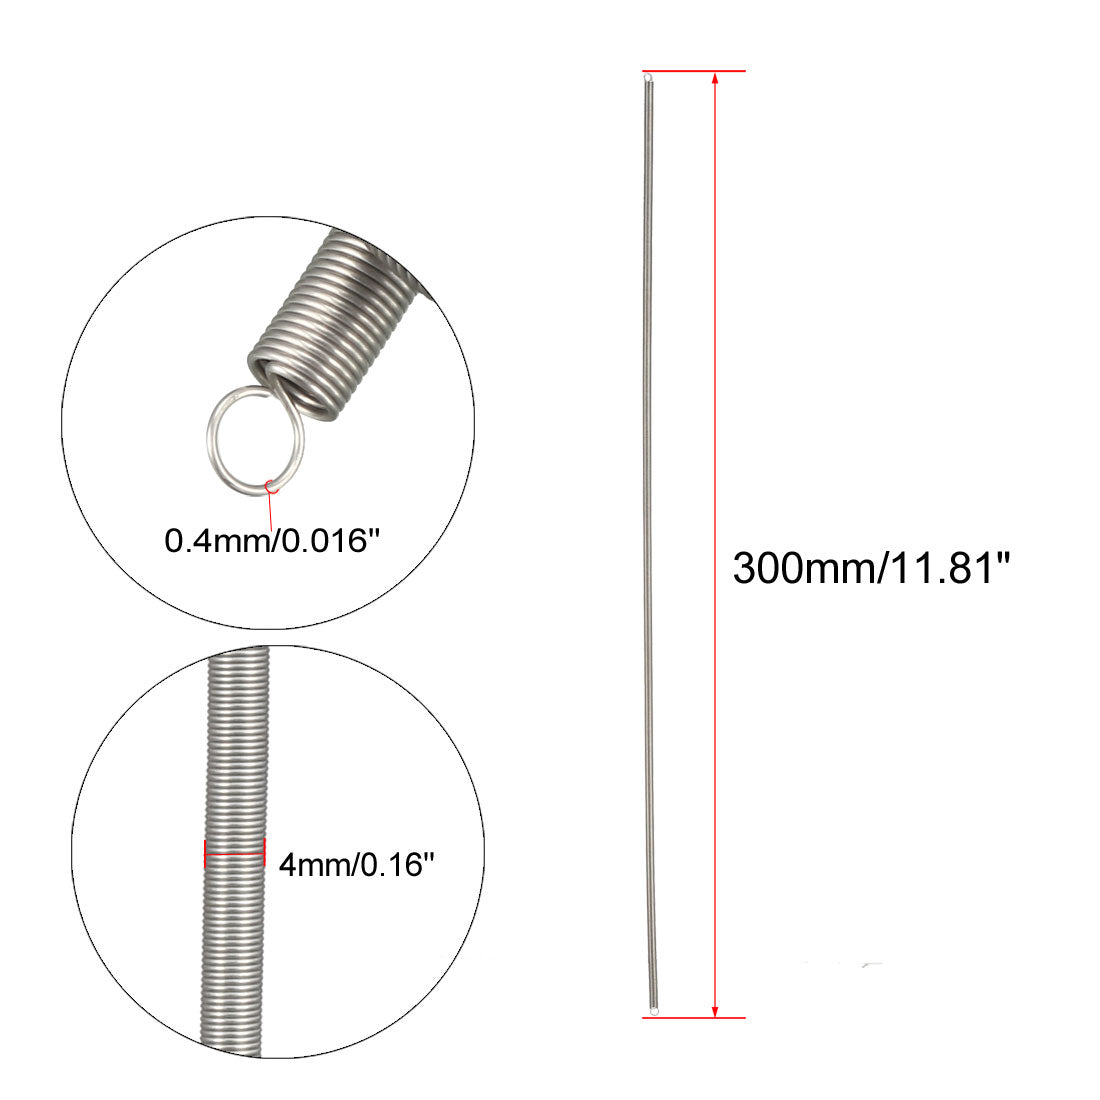 uxcell Uxcell Extended Tension Spring Wire Diameter 0.016", OD 0.16", Free Length 11.81"